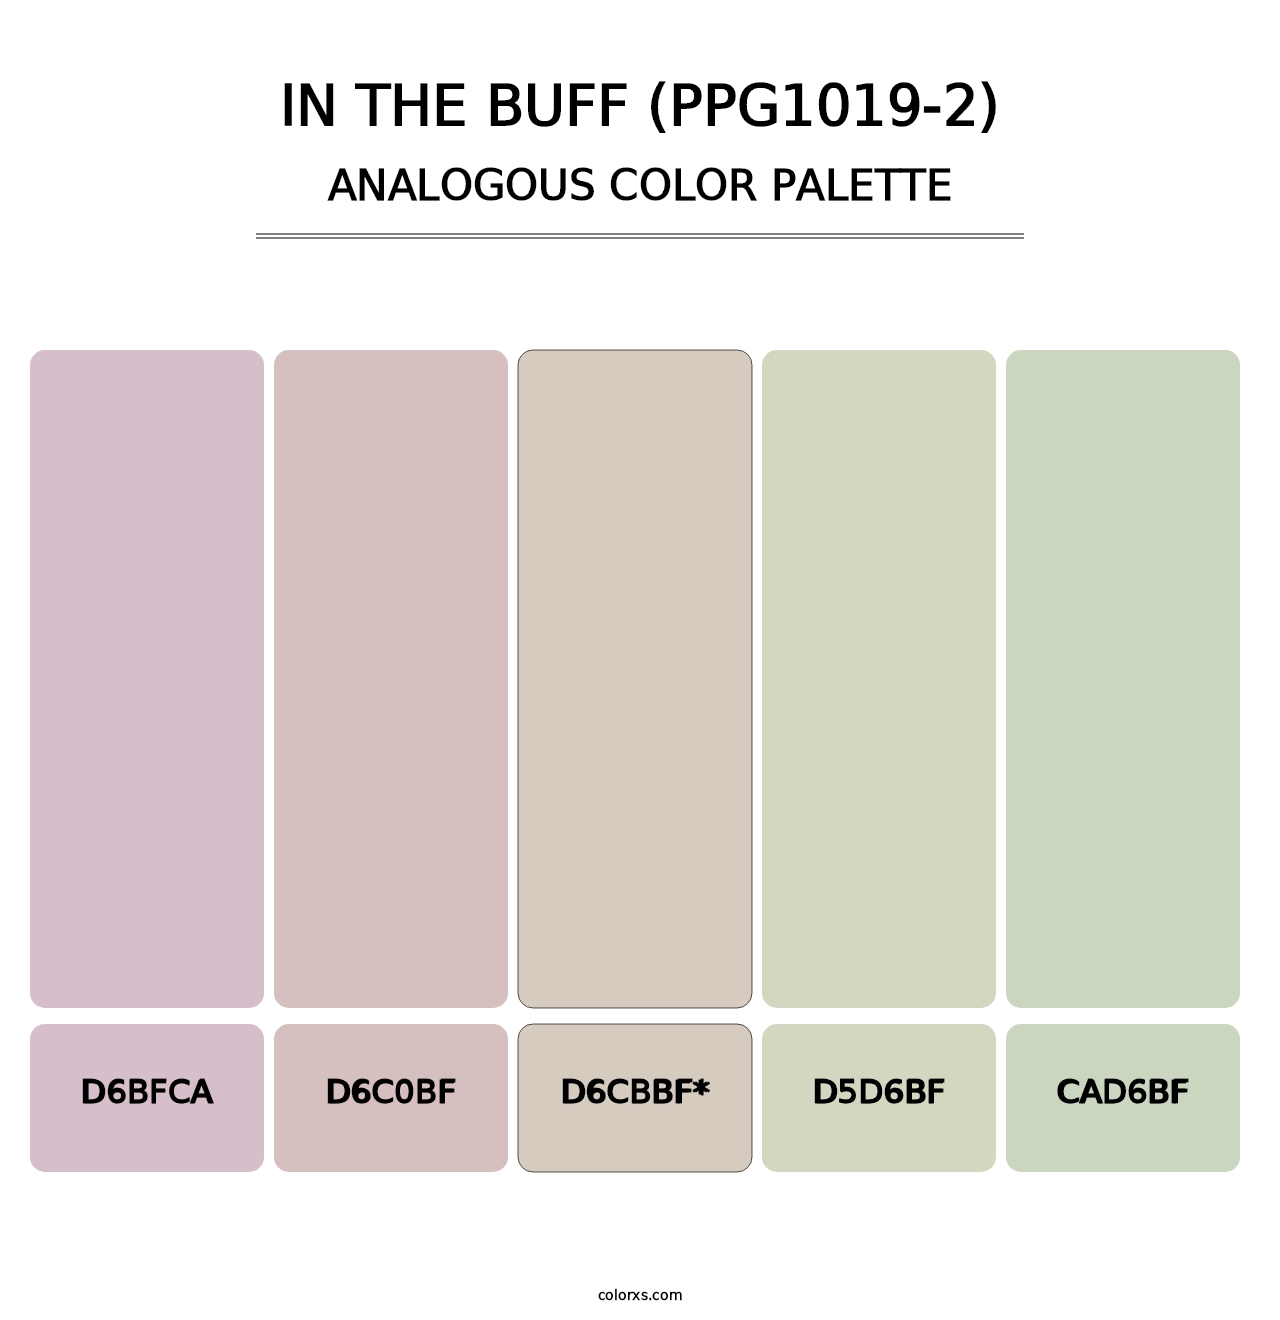 In The Buff (PPG1019-2) - Analogous Color Palette